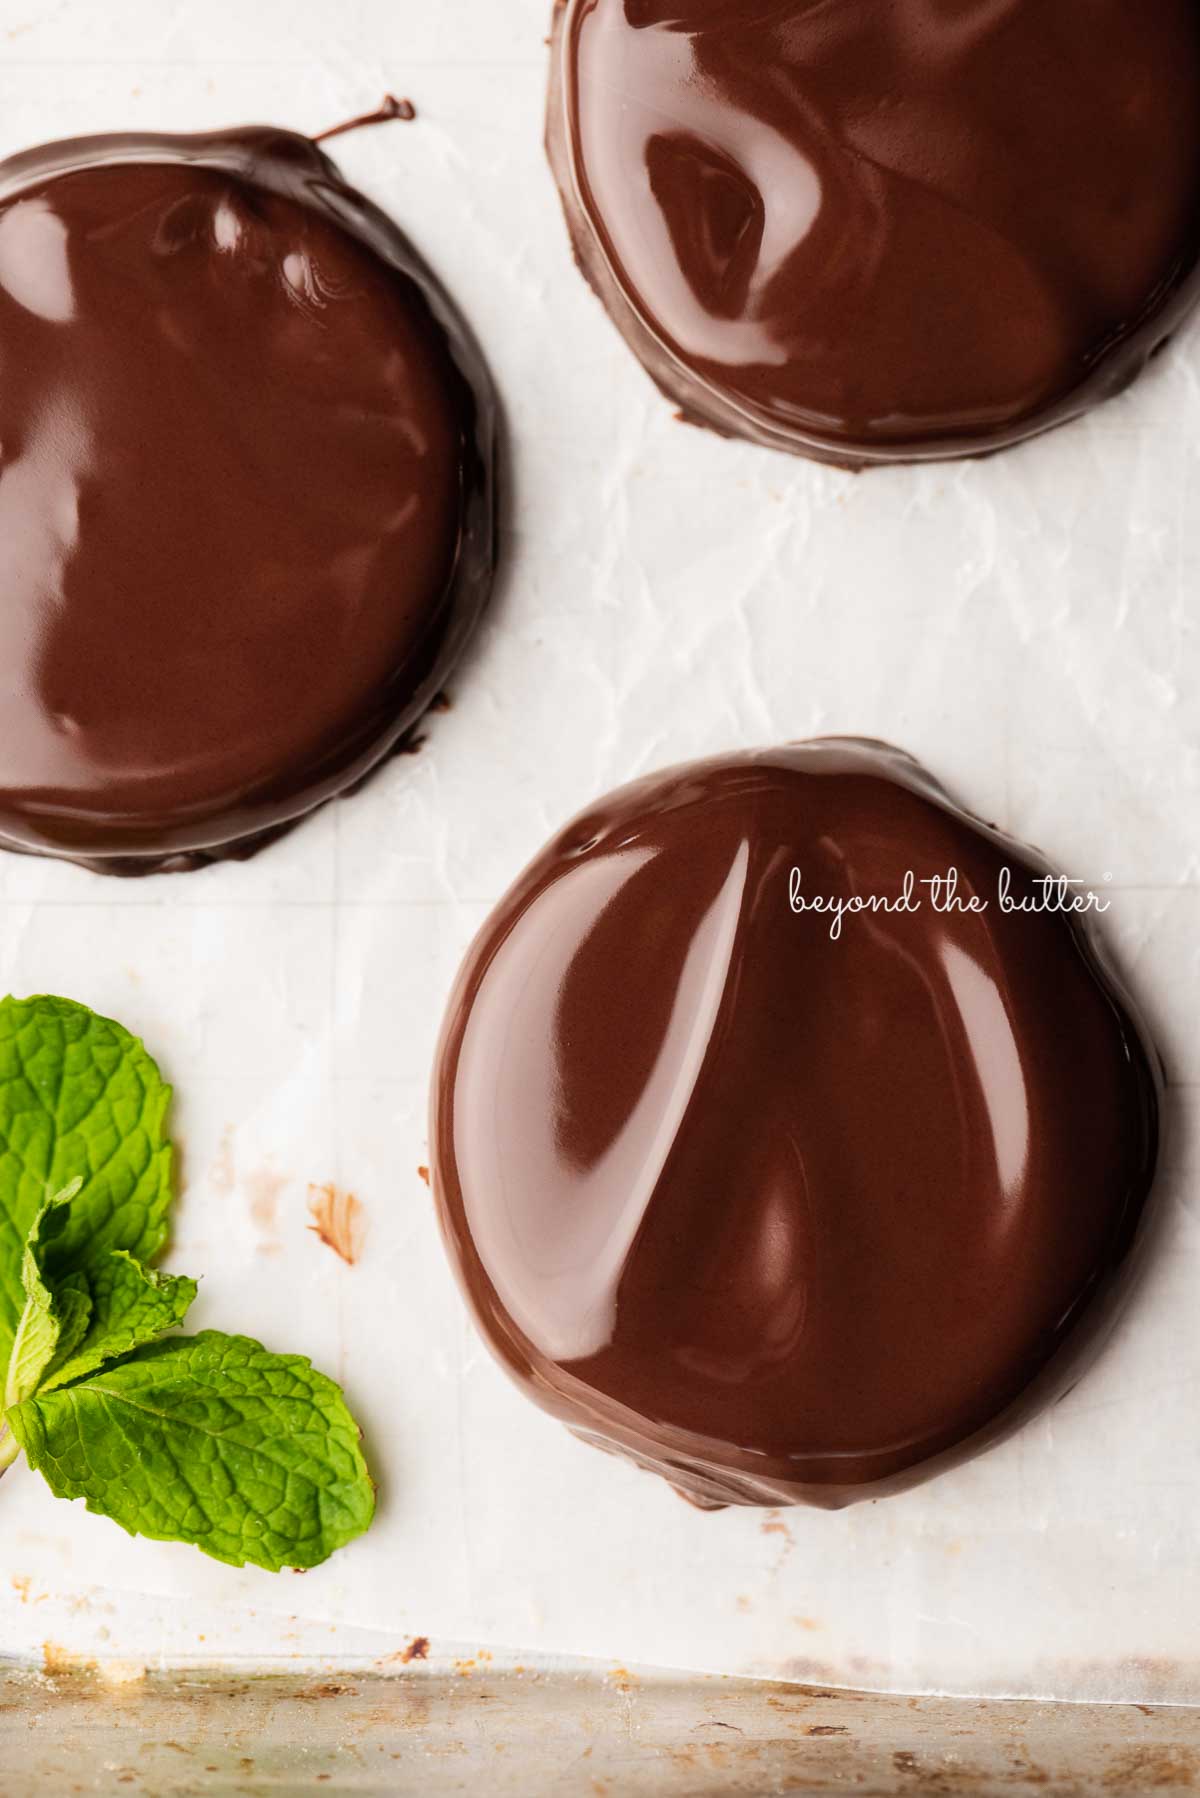 Copycat Girl Scout thin mint cookies just dipped in chocolate and placed on a wax paper lined baking sheet | © Beyond the Butter®